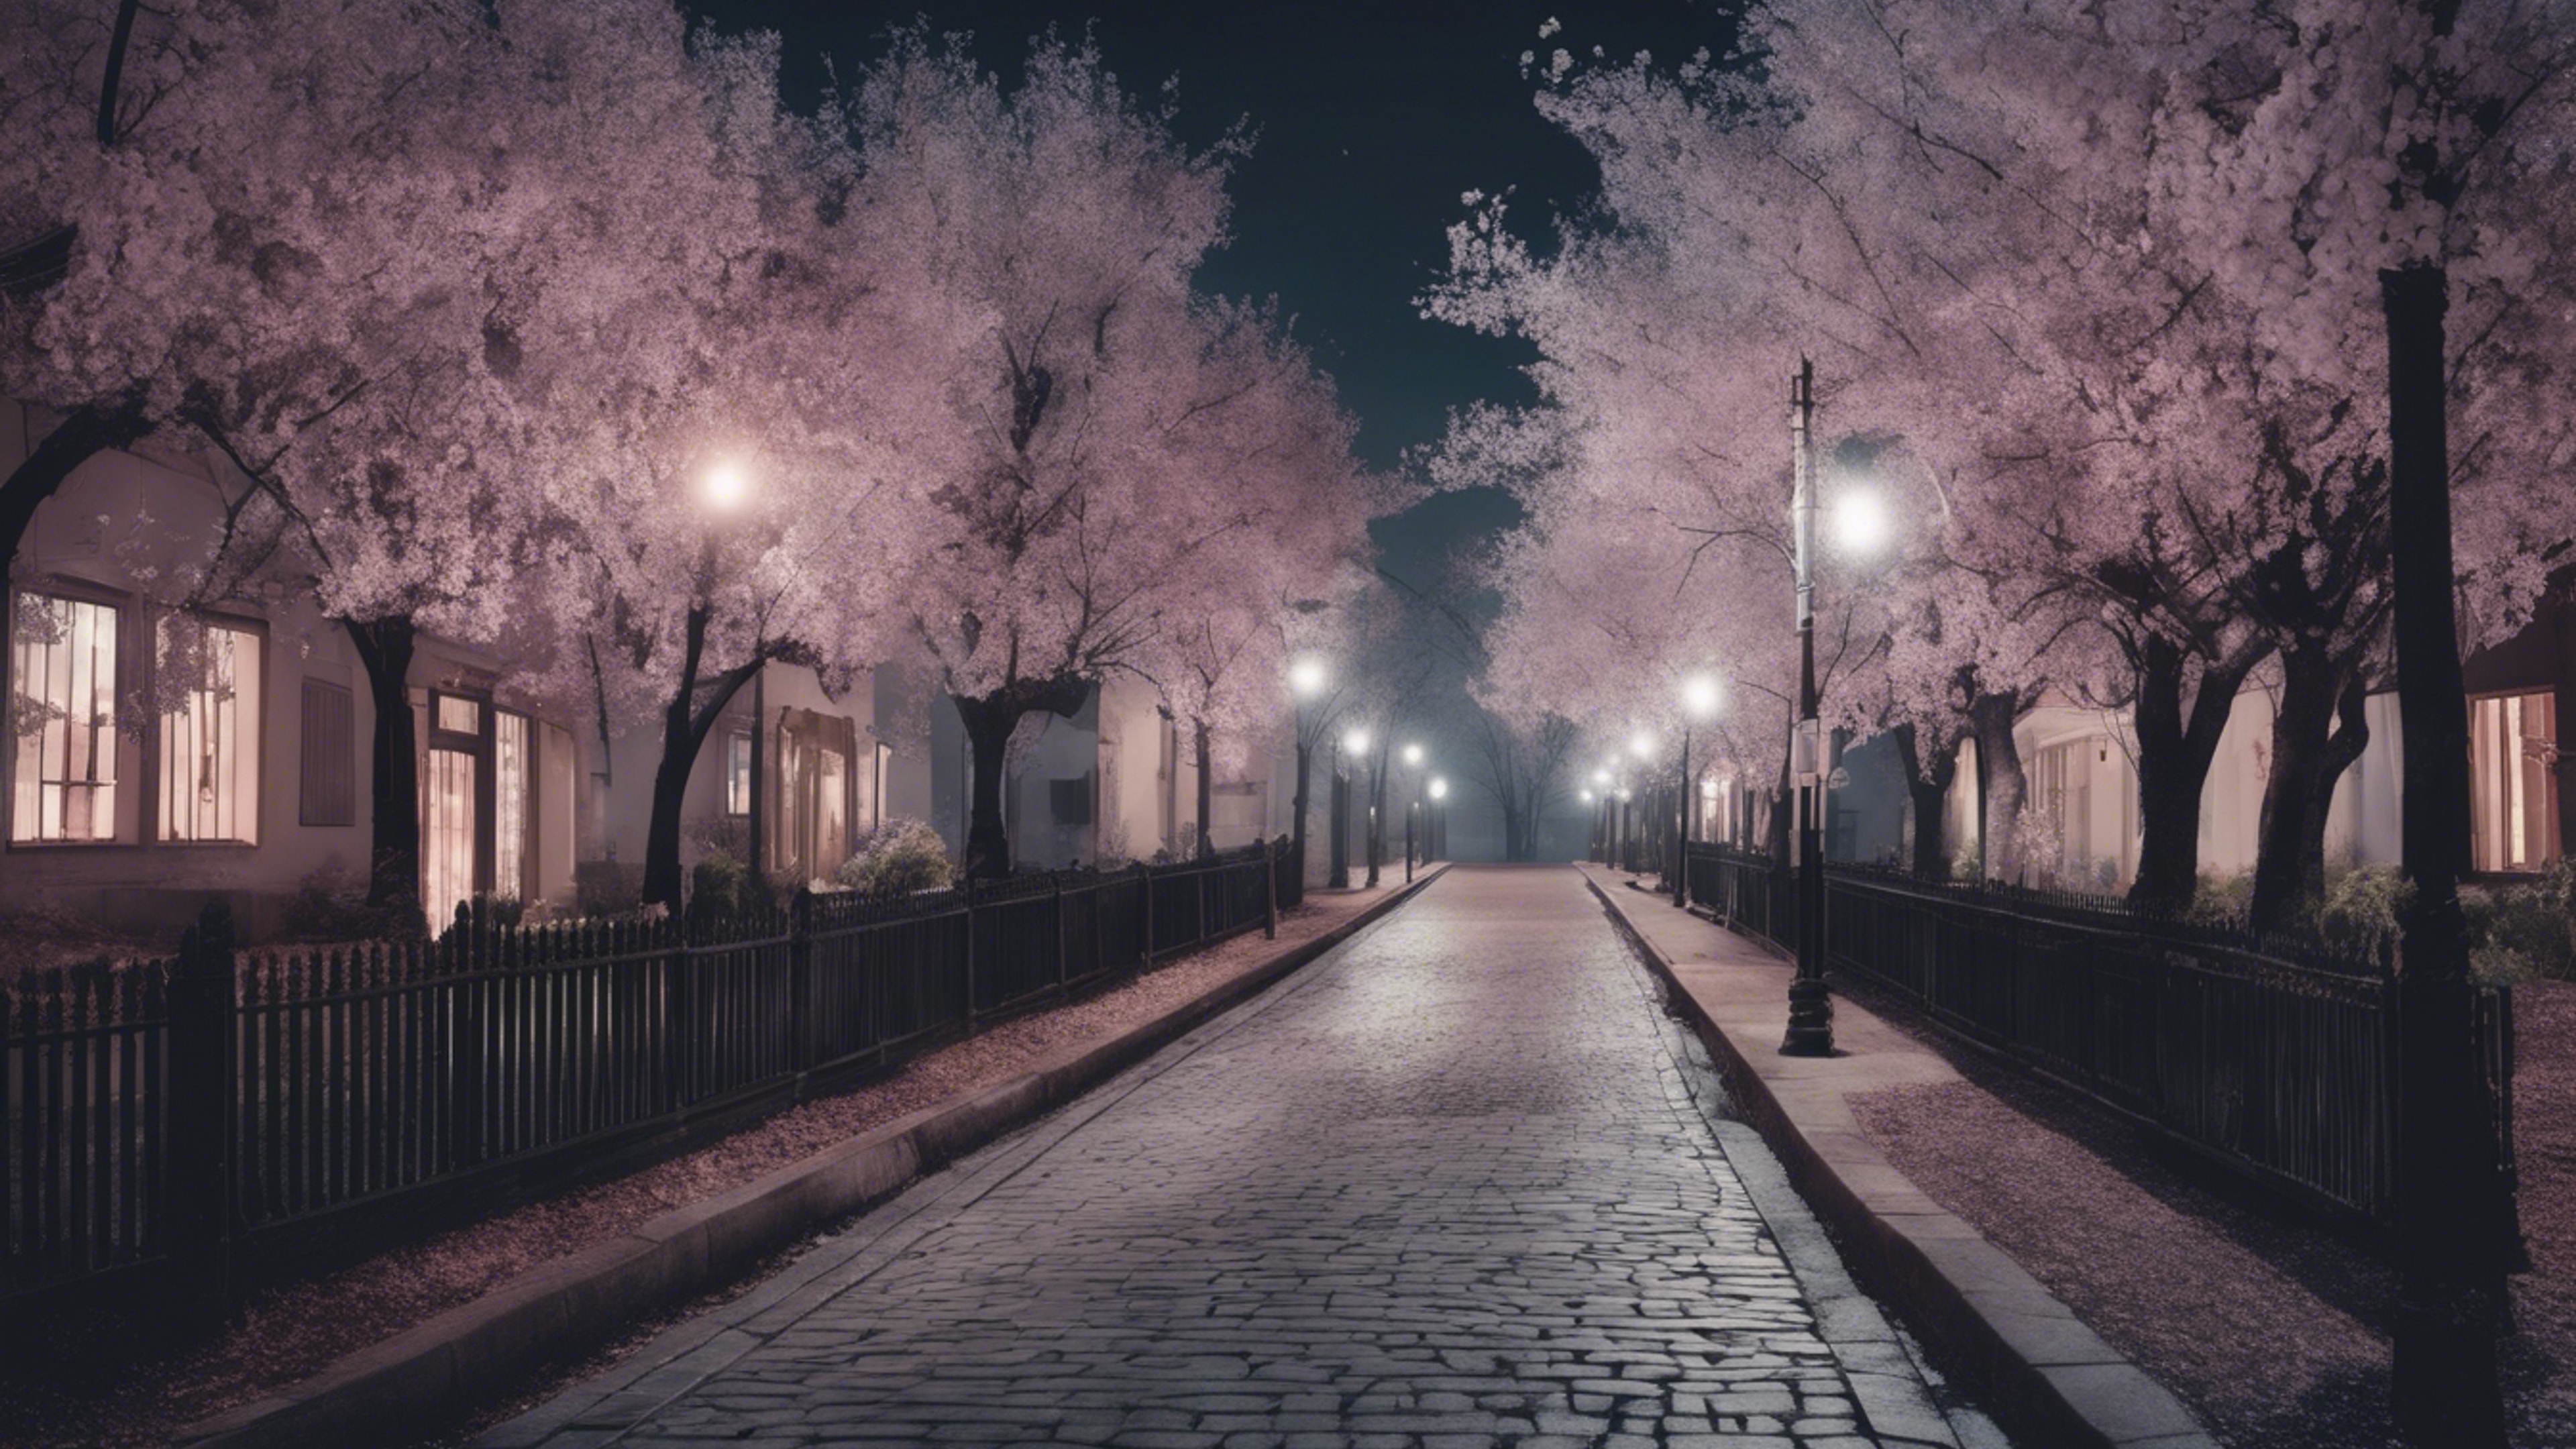 Pastel gothic street lined with black blossom trees under the ghostly night sky. 벽지[dc1e1b7f0a0c4838b6b6]